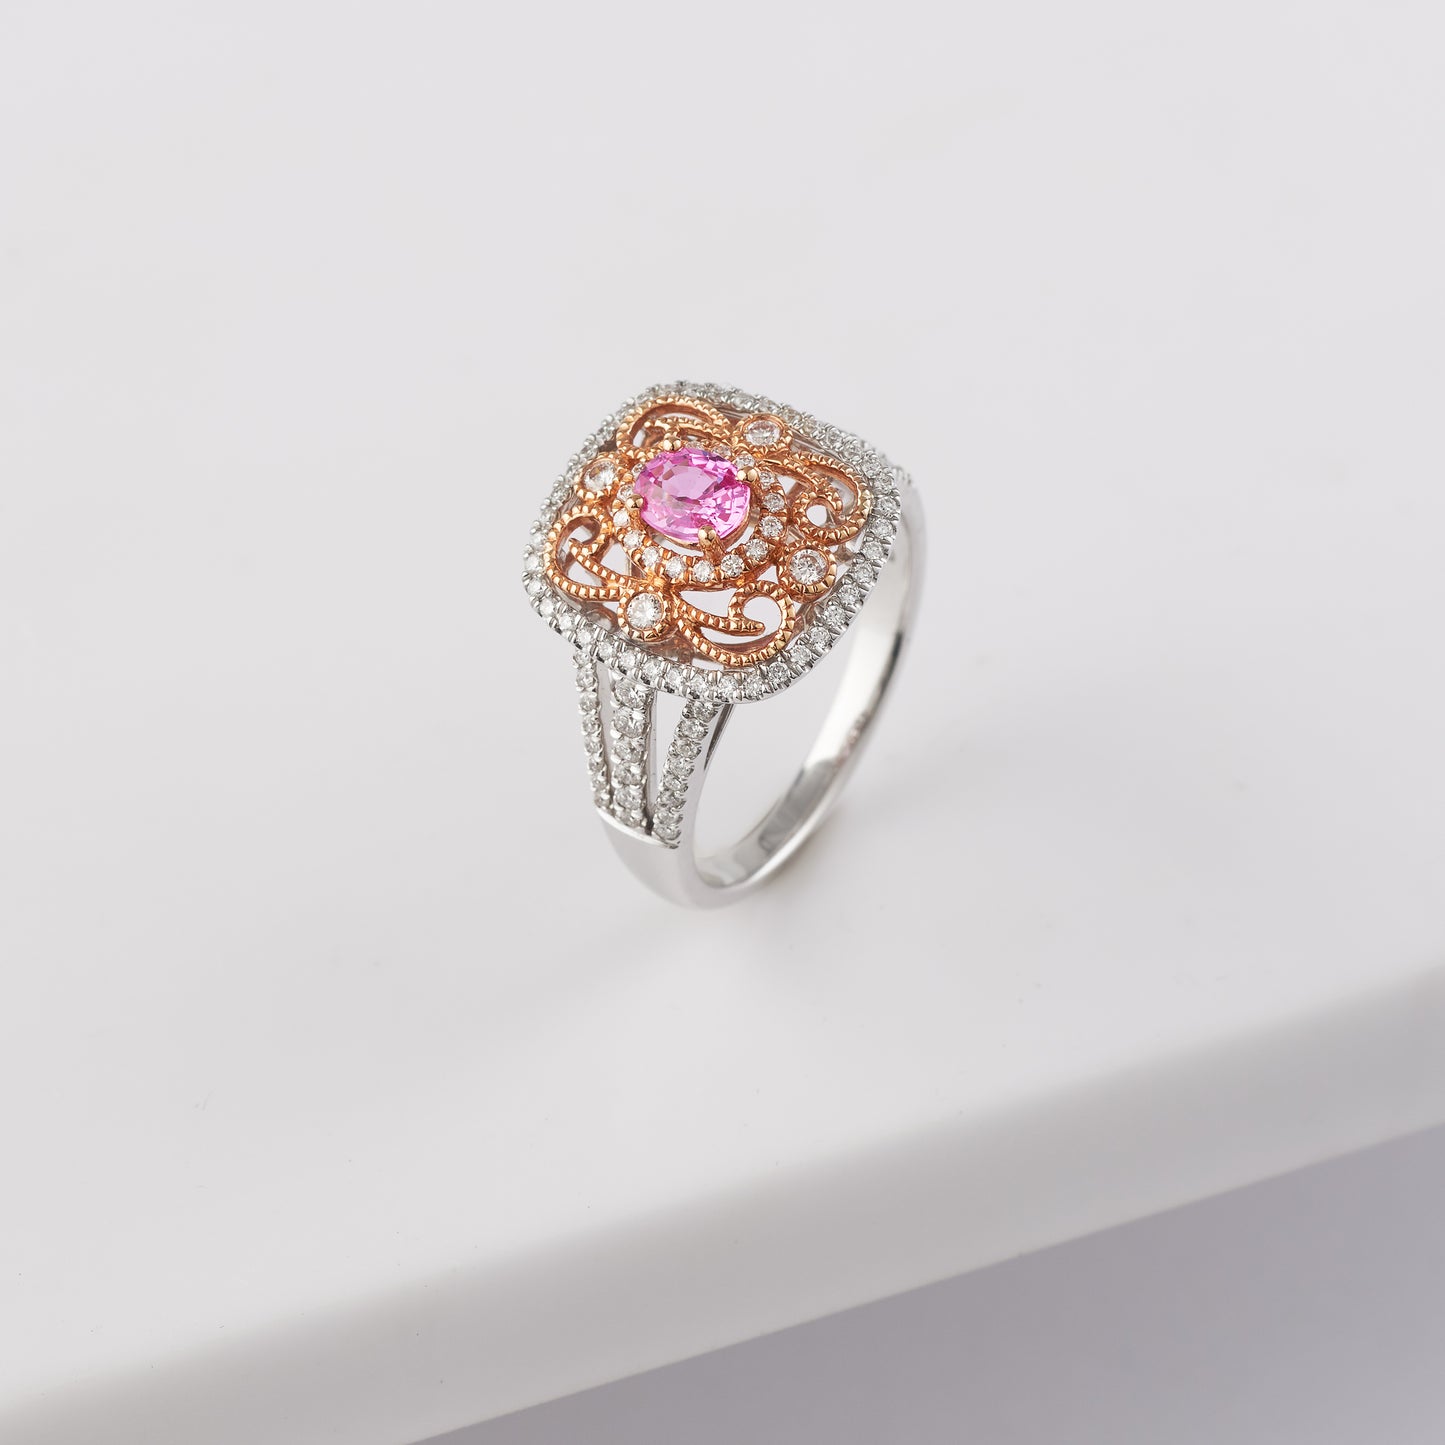 18K White and Rose Gold Oval Pink Sapphire Diamond Vintage Inspired Dress Ring 0.5tdw